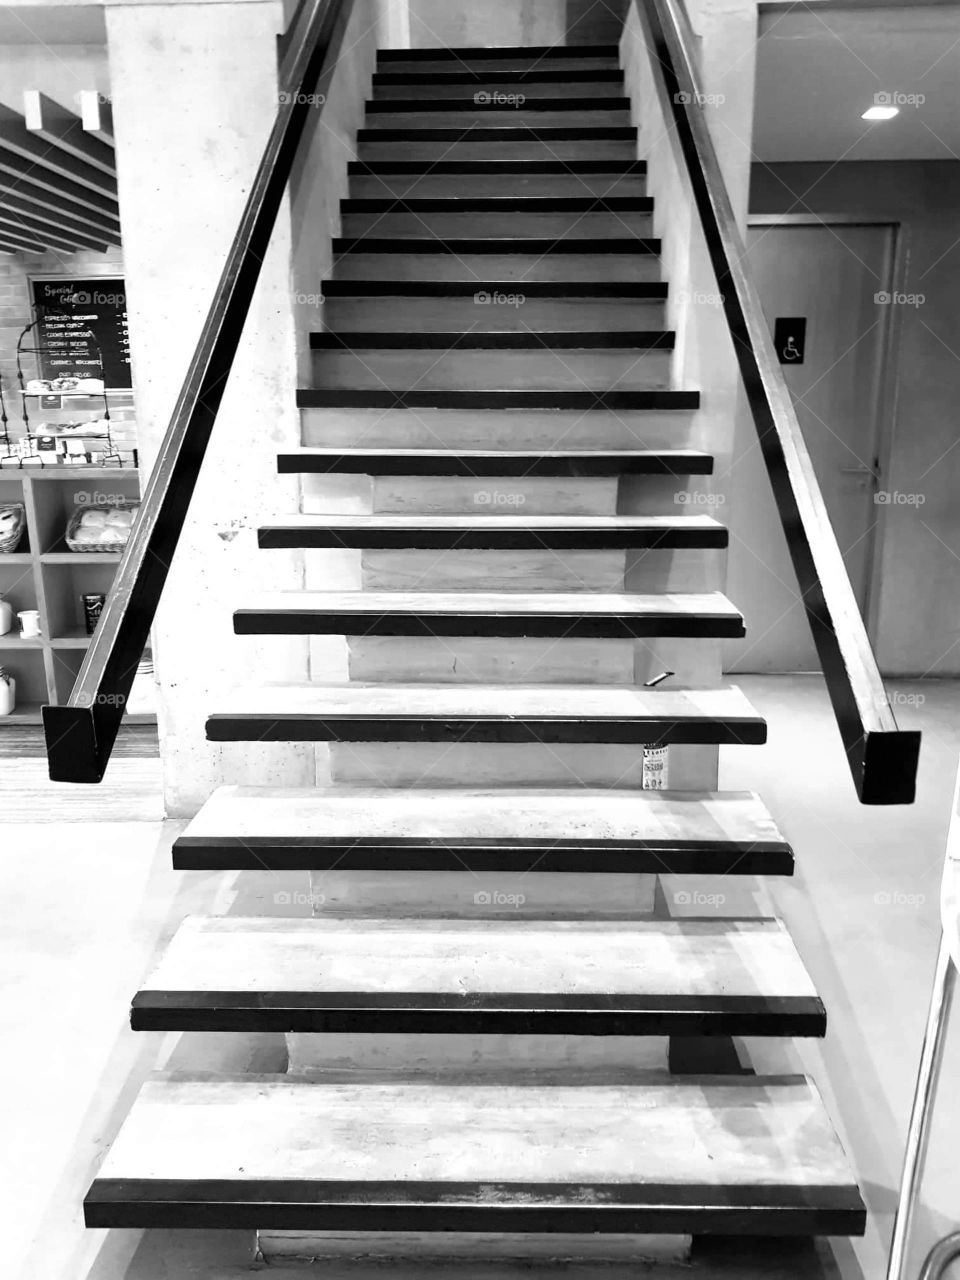 A black and white photo of modern, glass-styled stairway with handrails.